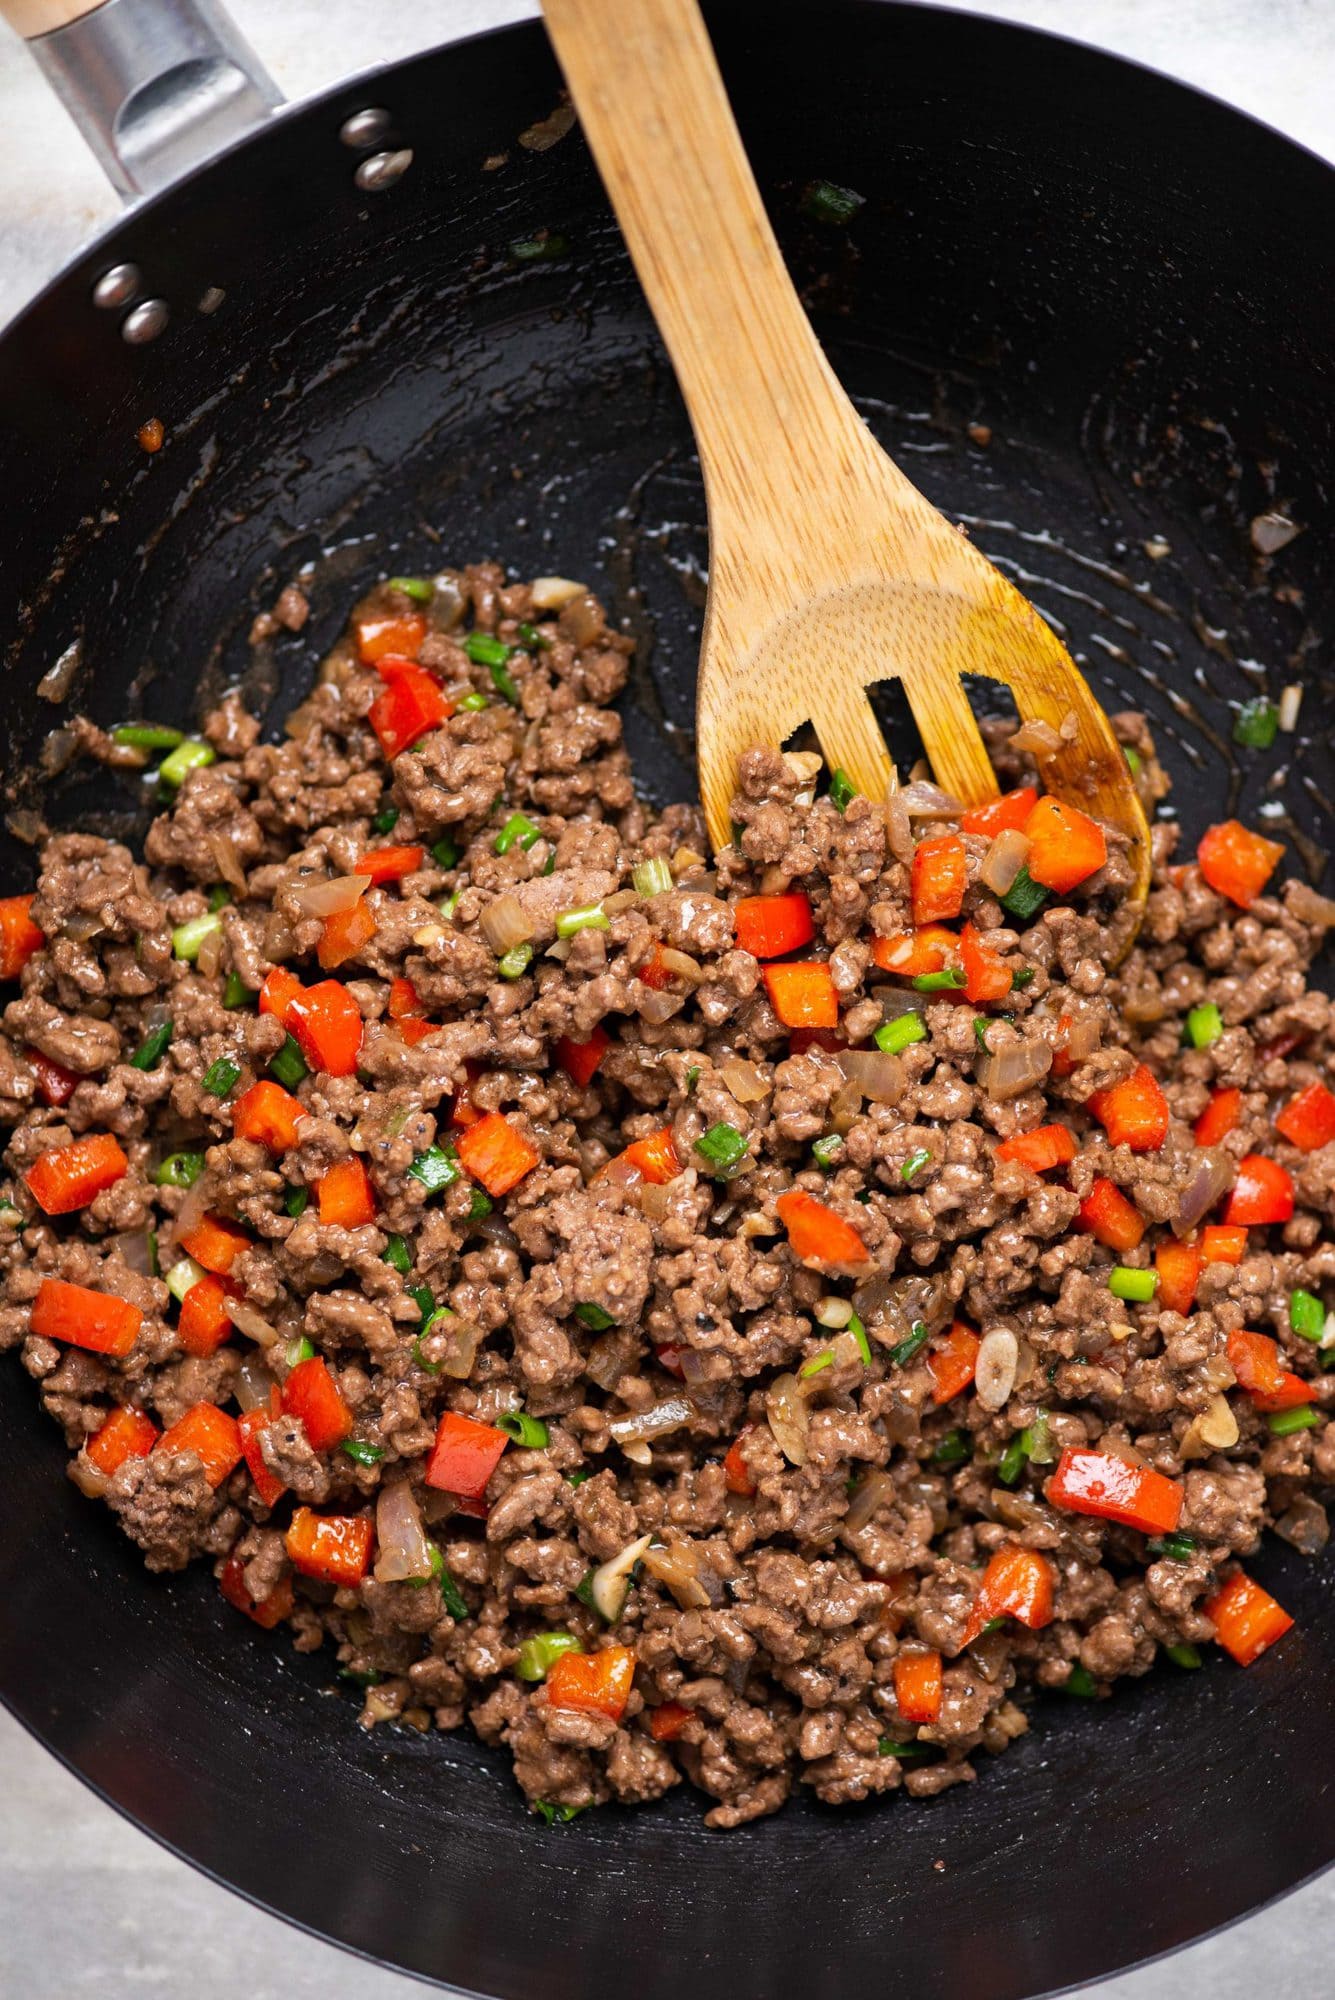 Top view of korean inspired juicy ground beef having red bell pepper and green onion stir fried in a wok with a wooden laddle.